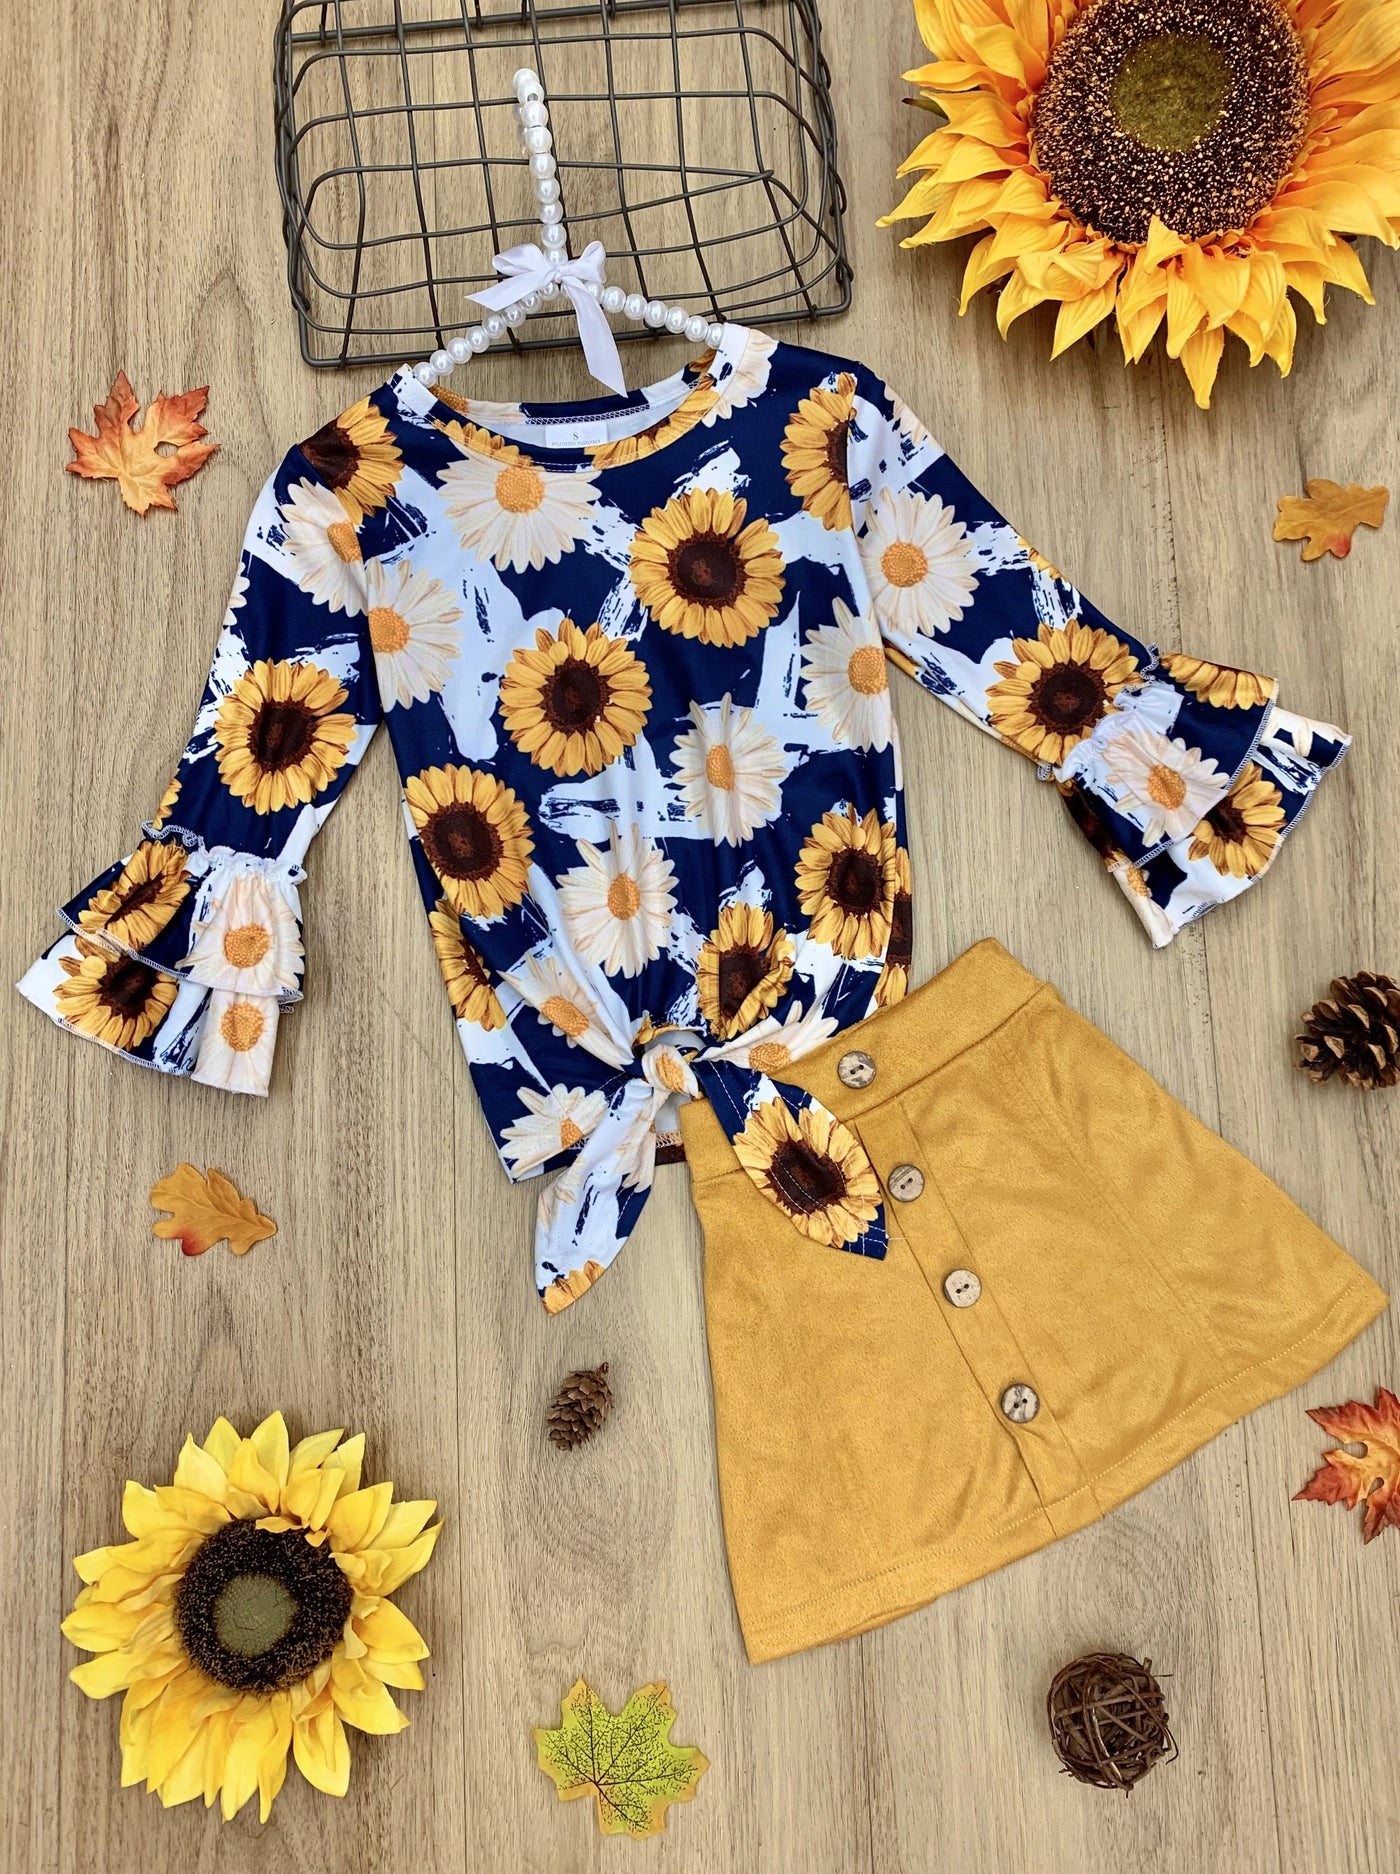 Little girls long-sleeve knot hem top with sunflower/daisy print, double ruffle cuffs, and a faux suede skirt with button applique - Mia Belle Girls